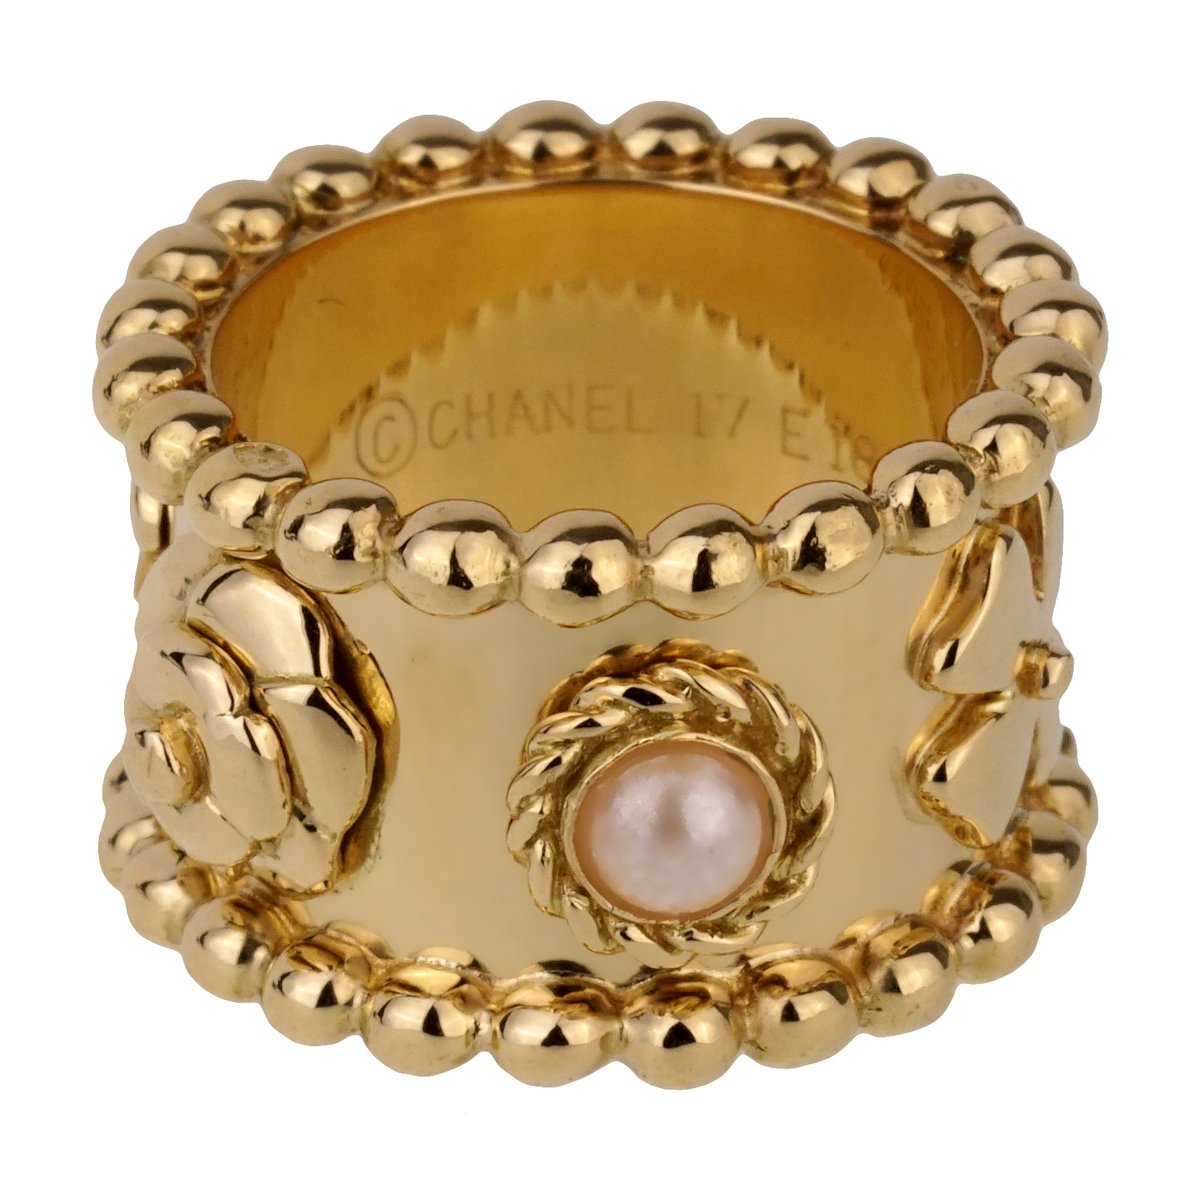 Chanel Signature Ring 18K Gold – LUX USA